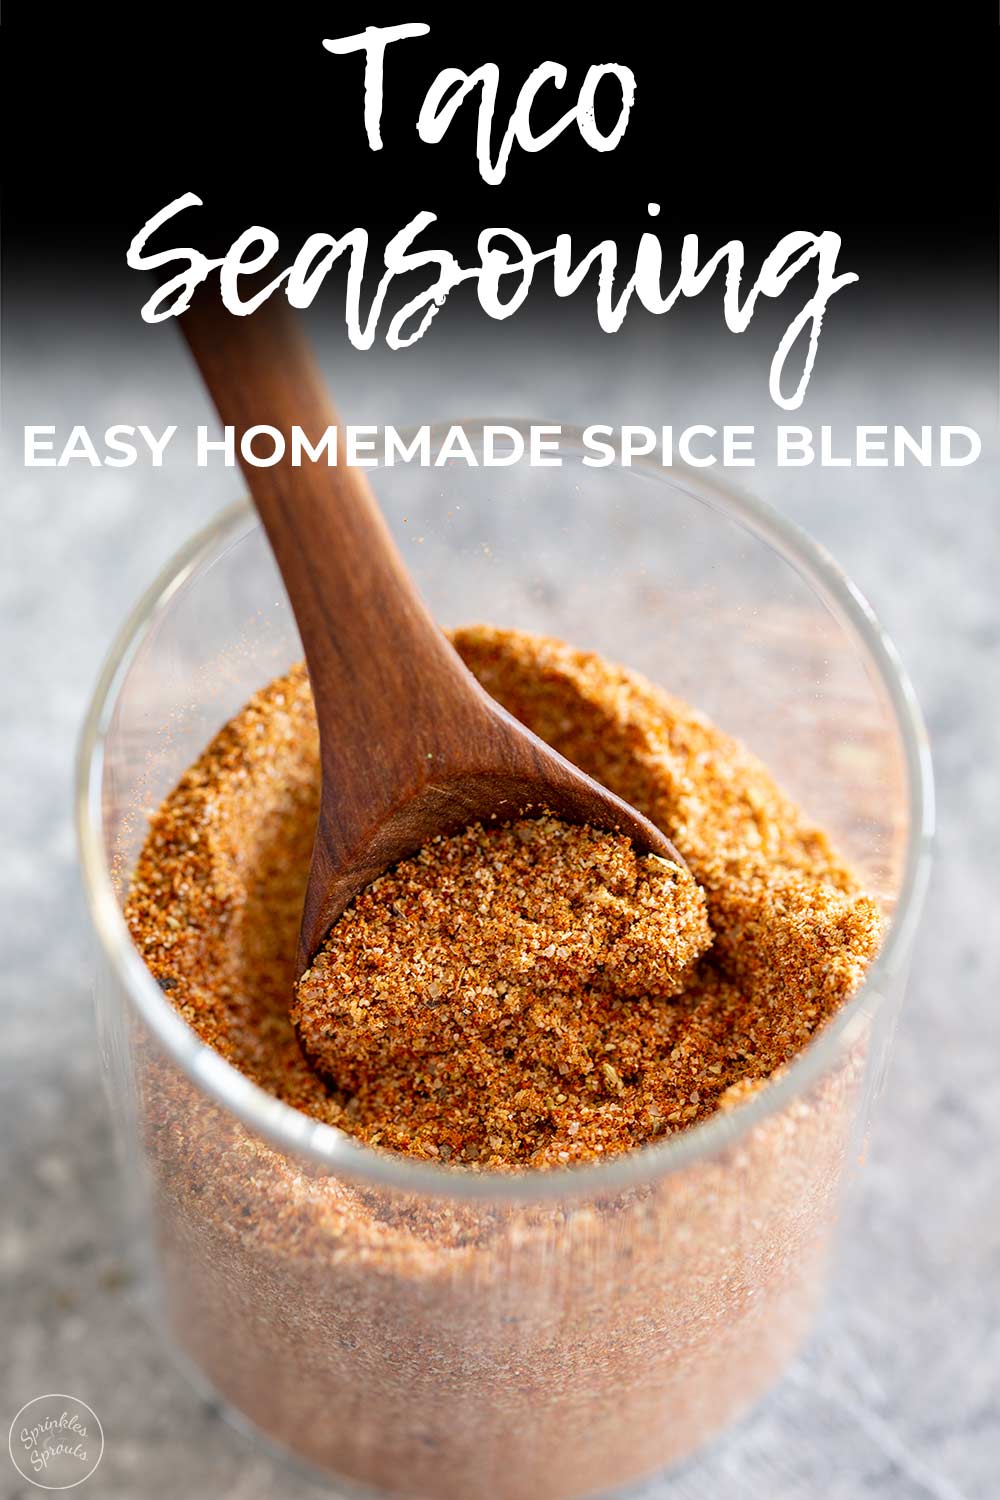 PINTEREST IMAGE - A pot of taco seasoning with text overlay